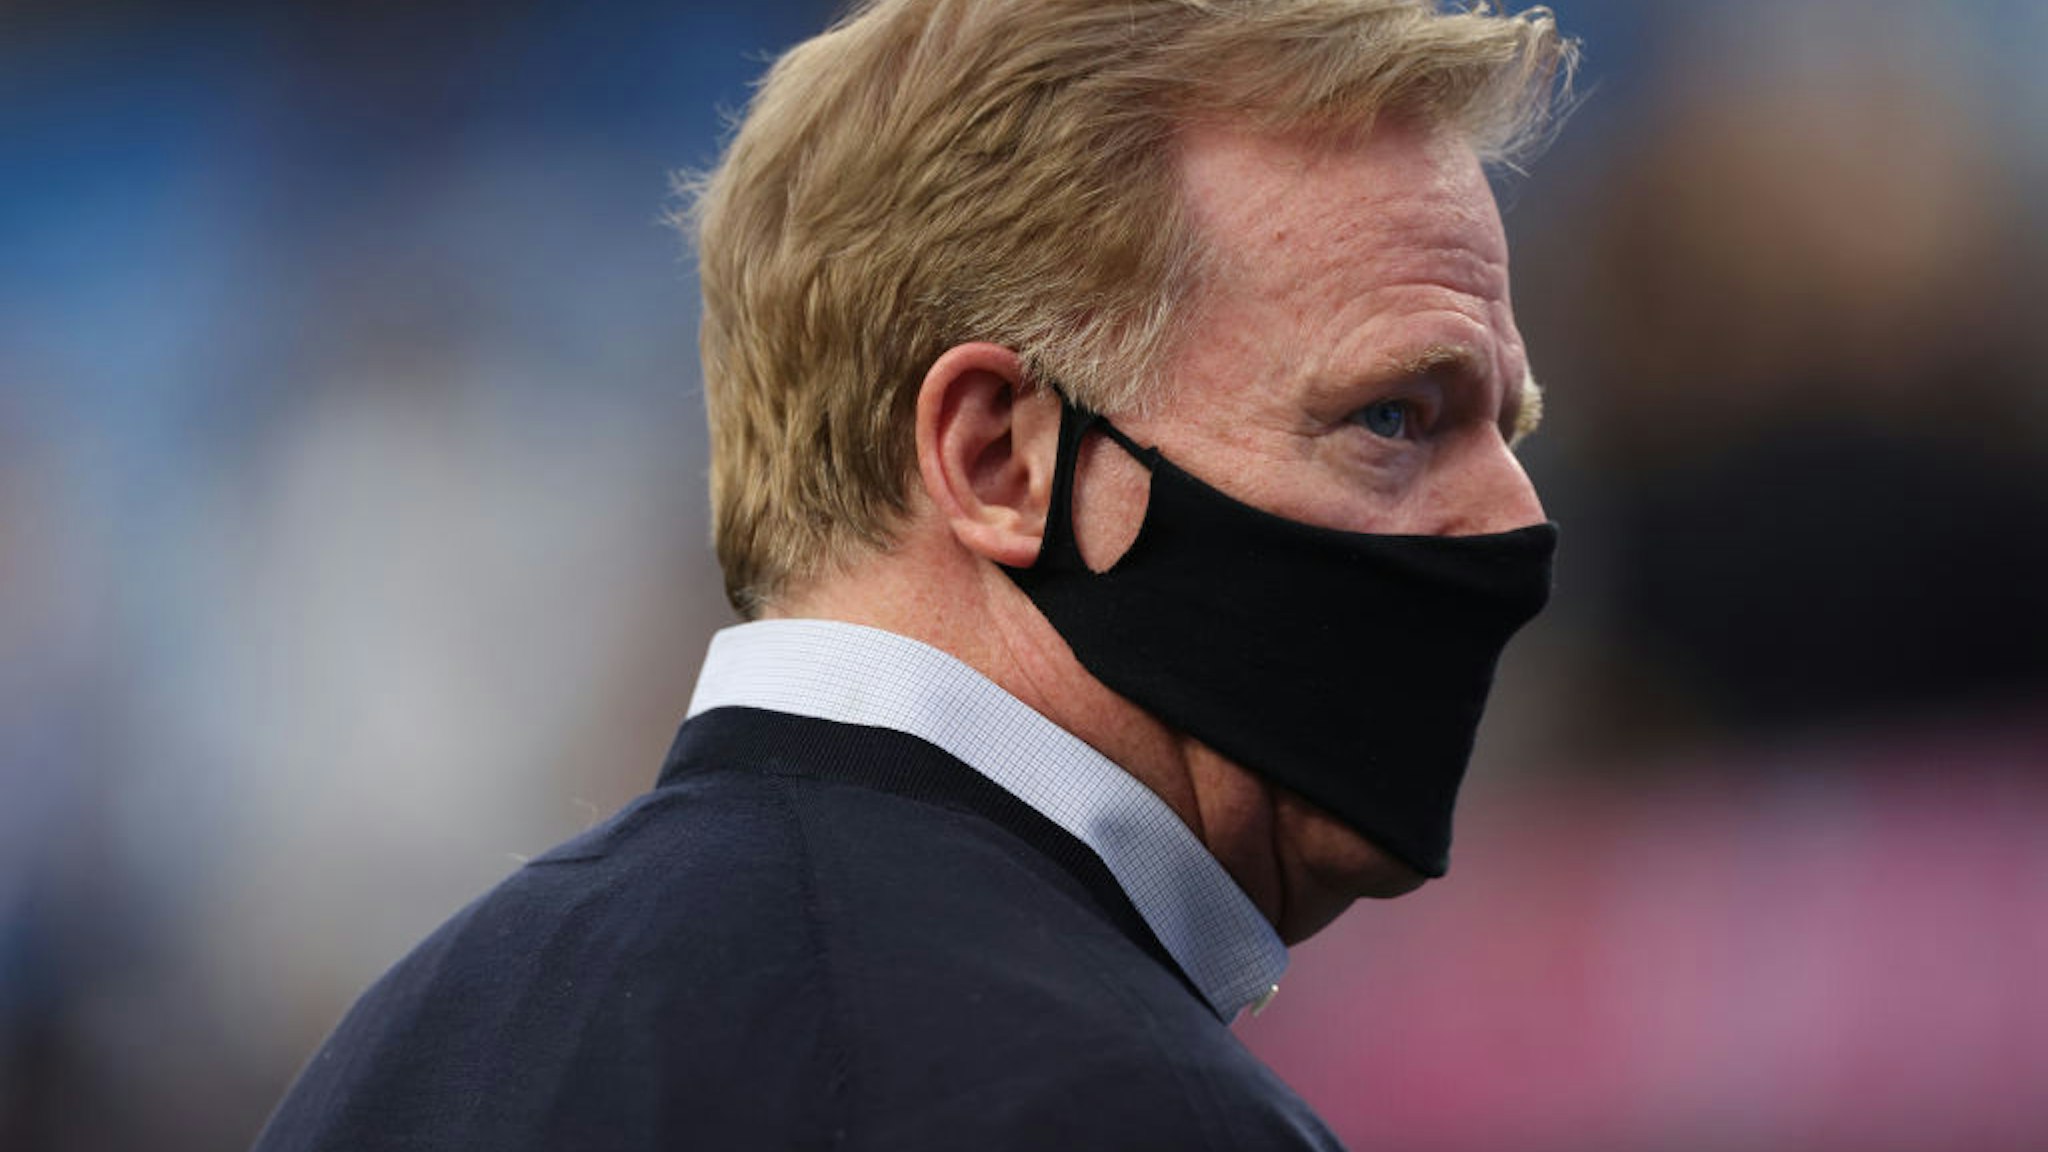 INGLEWOOD, CALIFORNIA - OCTOBER 04: NFL commissioner Roger Goodell wears a protective face covering due to the Covid-19 pandemic before the Las Vegas Raiders play against the Los Angeles Chargers at SoFi Stadium on October 4, 2021 in Inglewood, California. (Photo by Harry How/Getty Images)